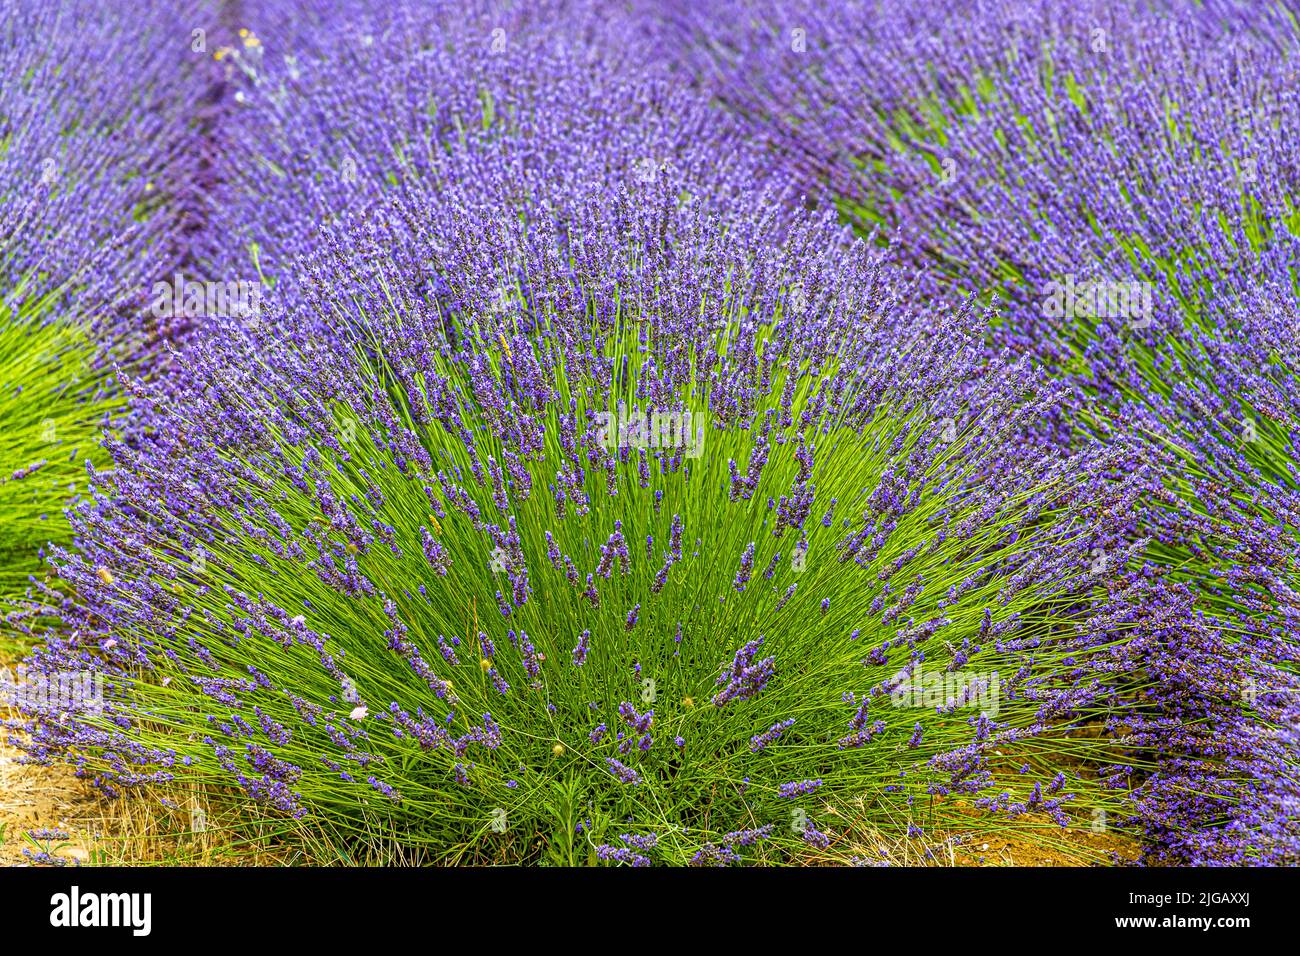 Lavandin usually forms larger and much more flowers. A decisive advantage for the industry is also the almost six times higher yield of essential oils that lavandin provides. In comparison, about 40 kg of lavandin flower panicles are sufficient to obtain the same amount of oil from about 150 kg of true lavender. While with real lavender you have to wait two to four years for the first harvest, oil extraction from lavandin fields can begin in the very first year. Stock Photo